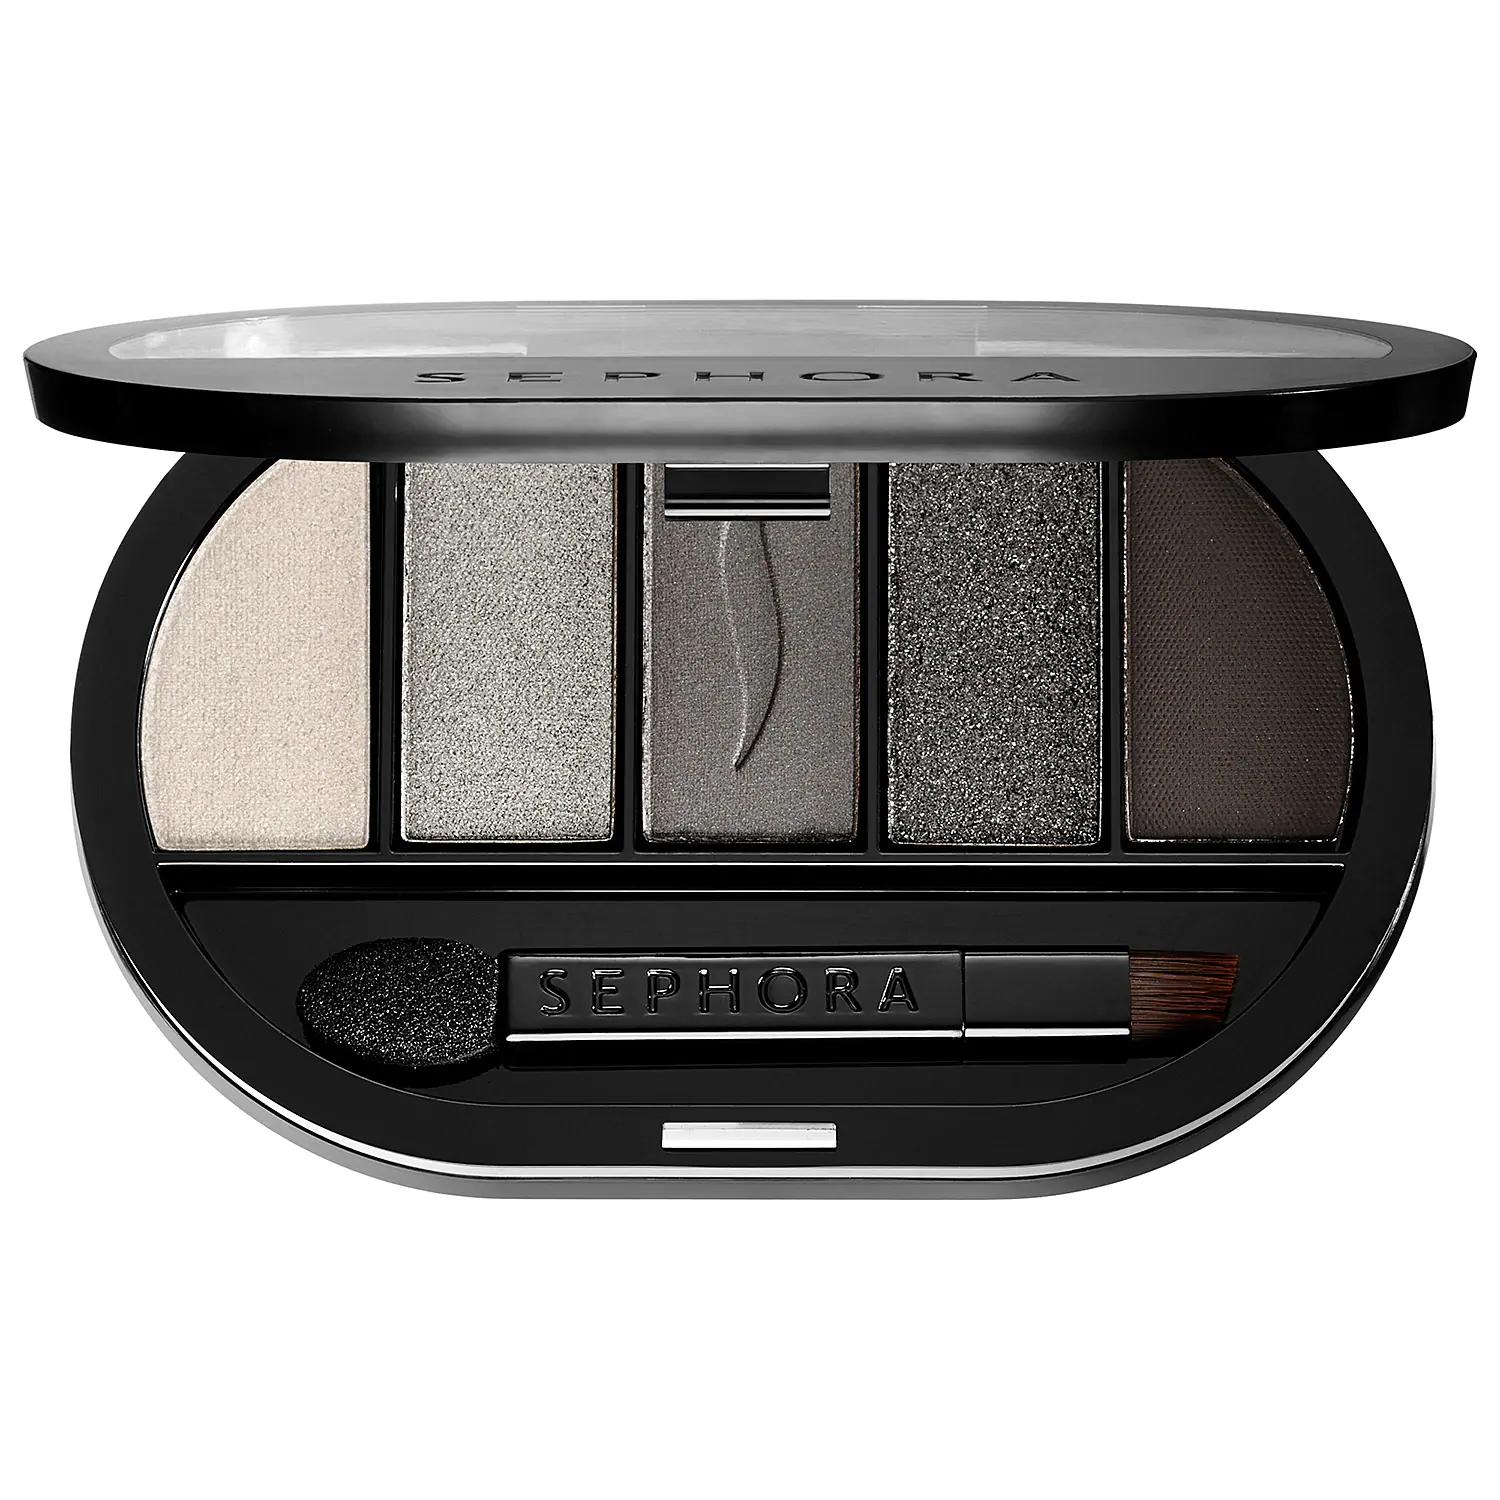 Sephora Colorful 5 Eyeshadow Palette Uptown To Downtown Smoky